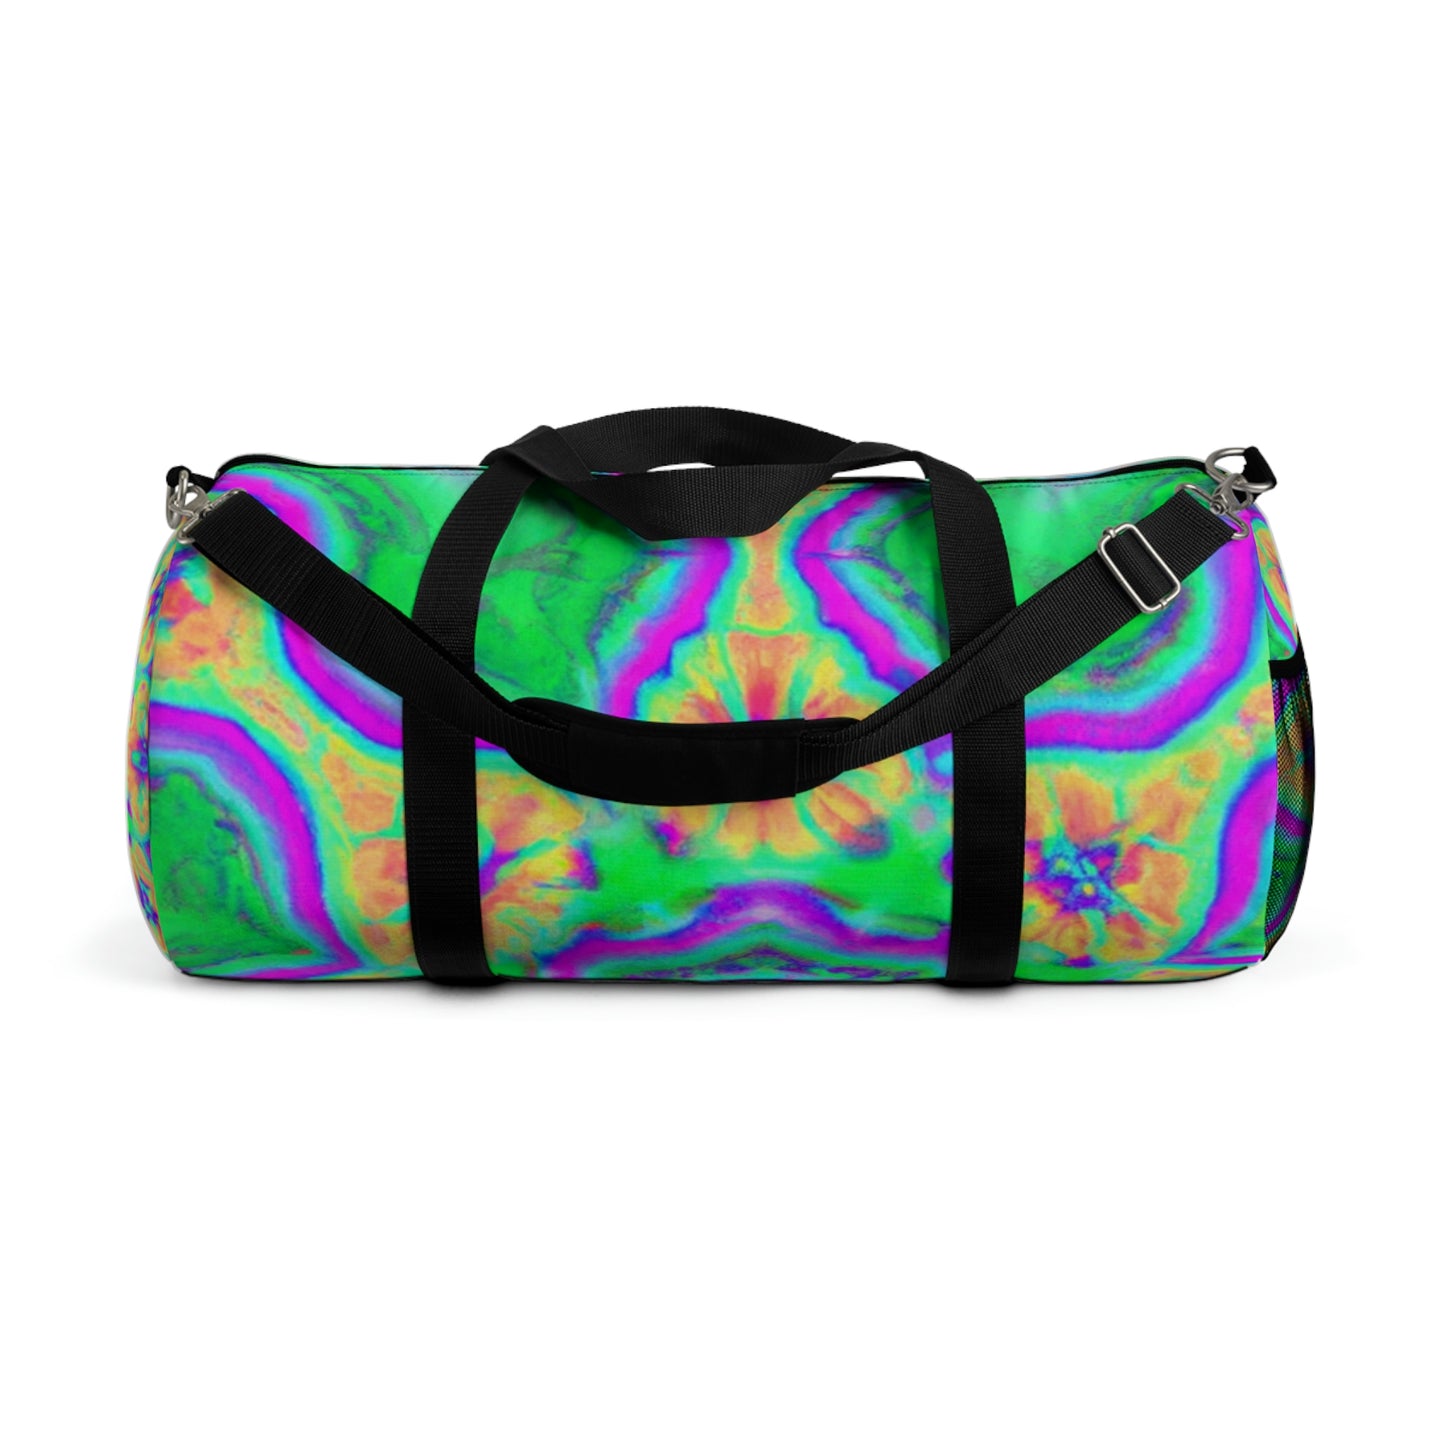 Quillmore - Psychedelic Duffel Bag